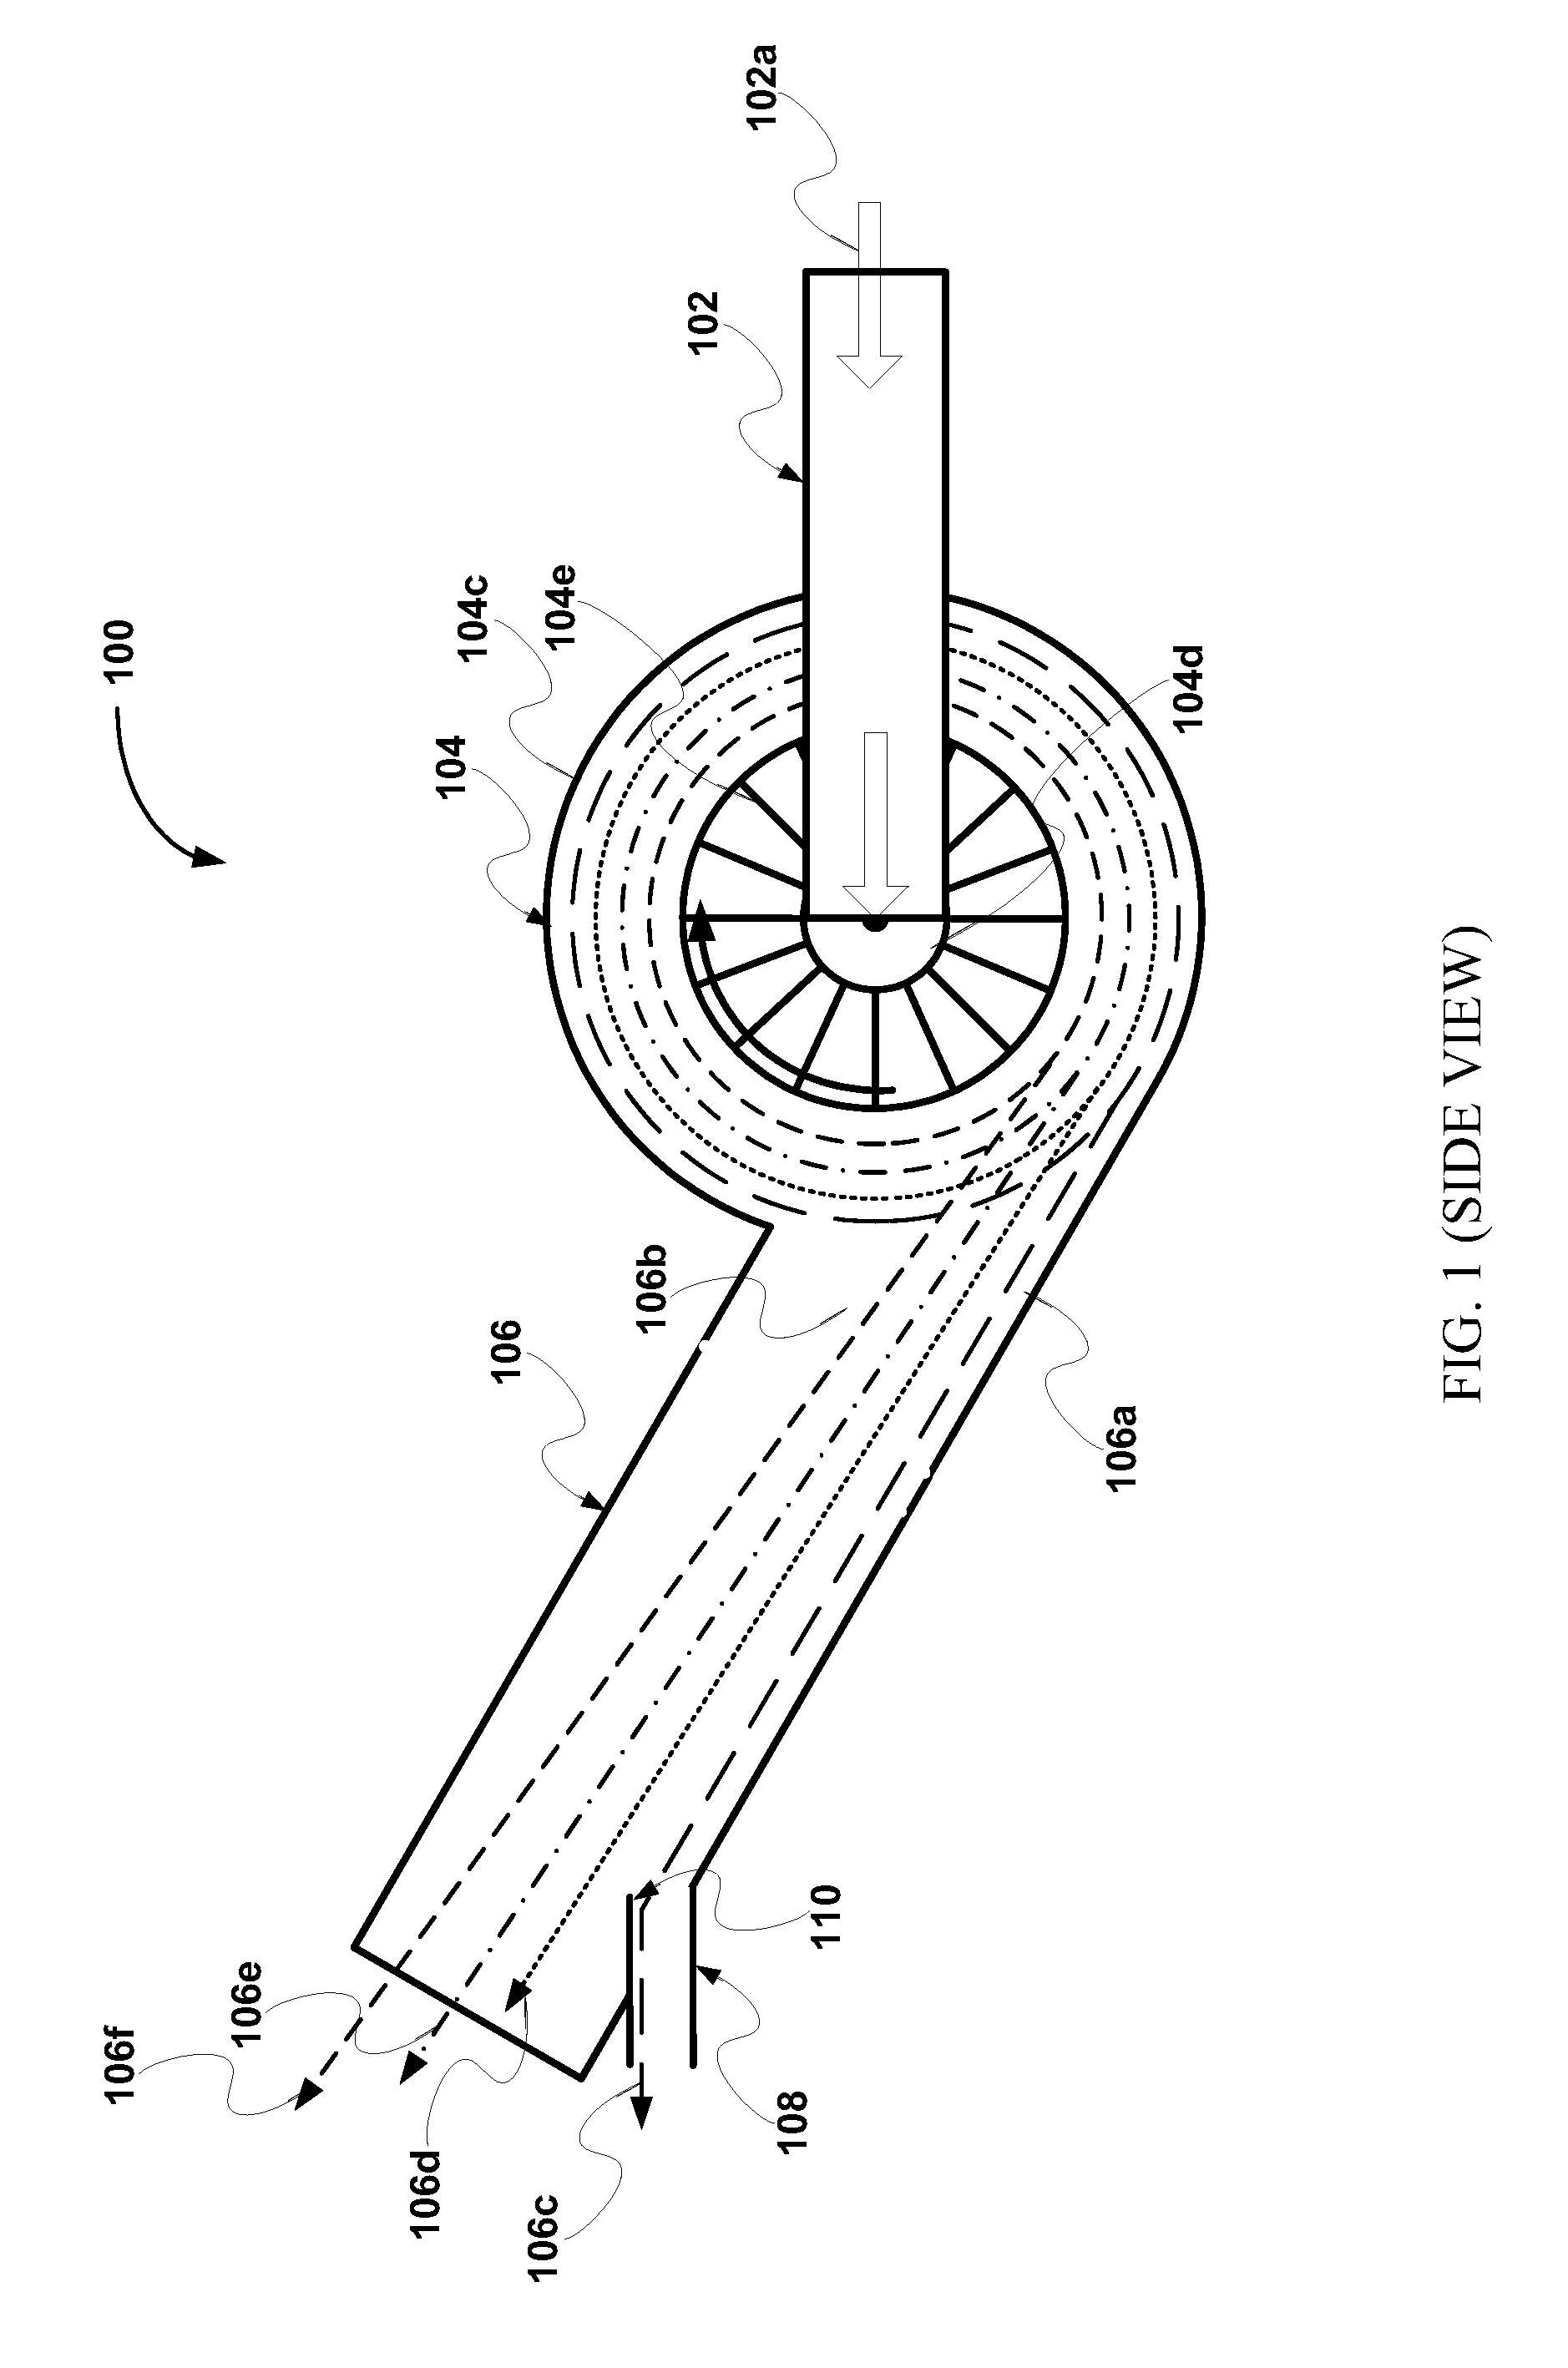 System and method for gas separation